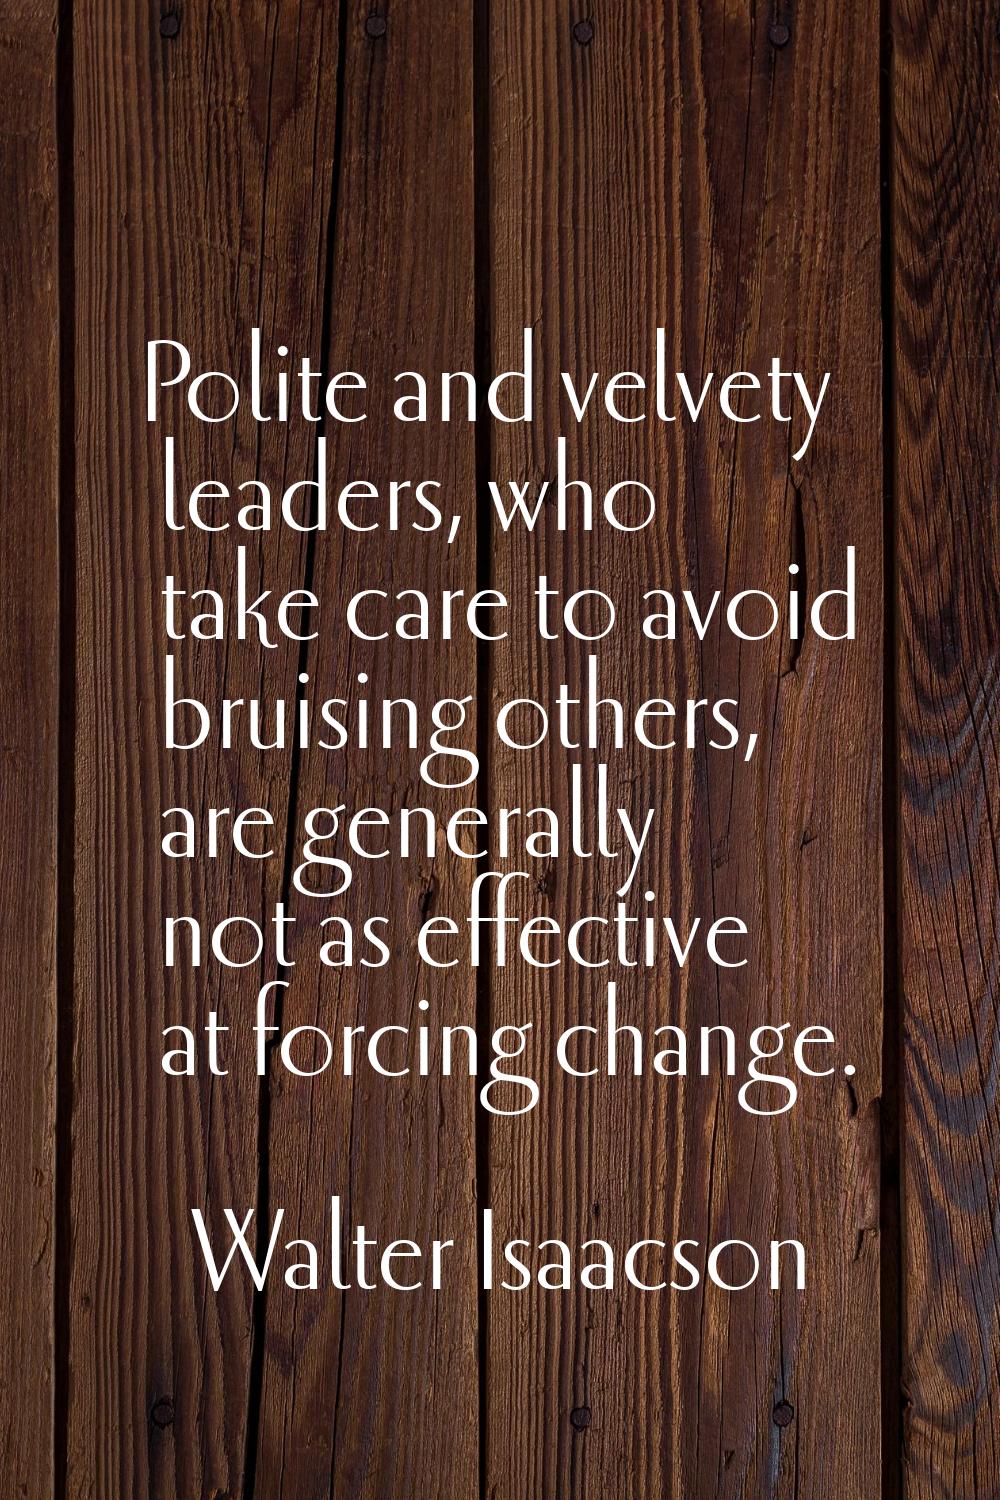 Polite and velvety leaders, who take care to avoid bruising others, are generally not as effective 